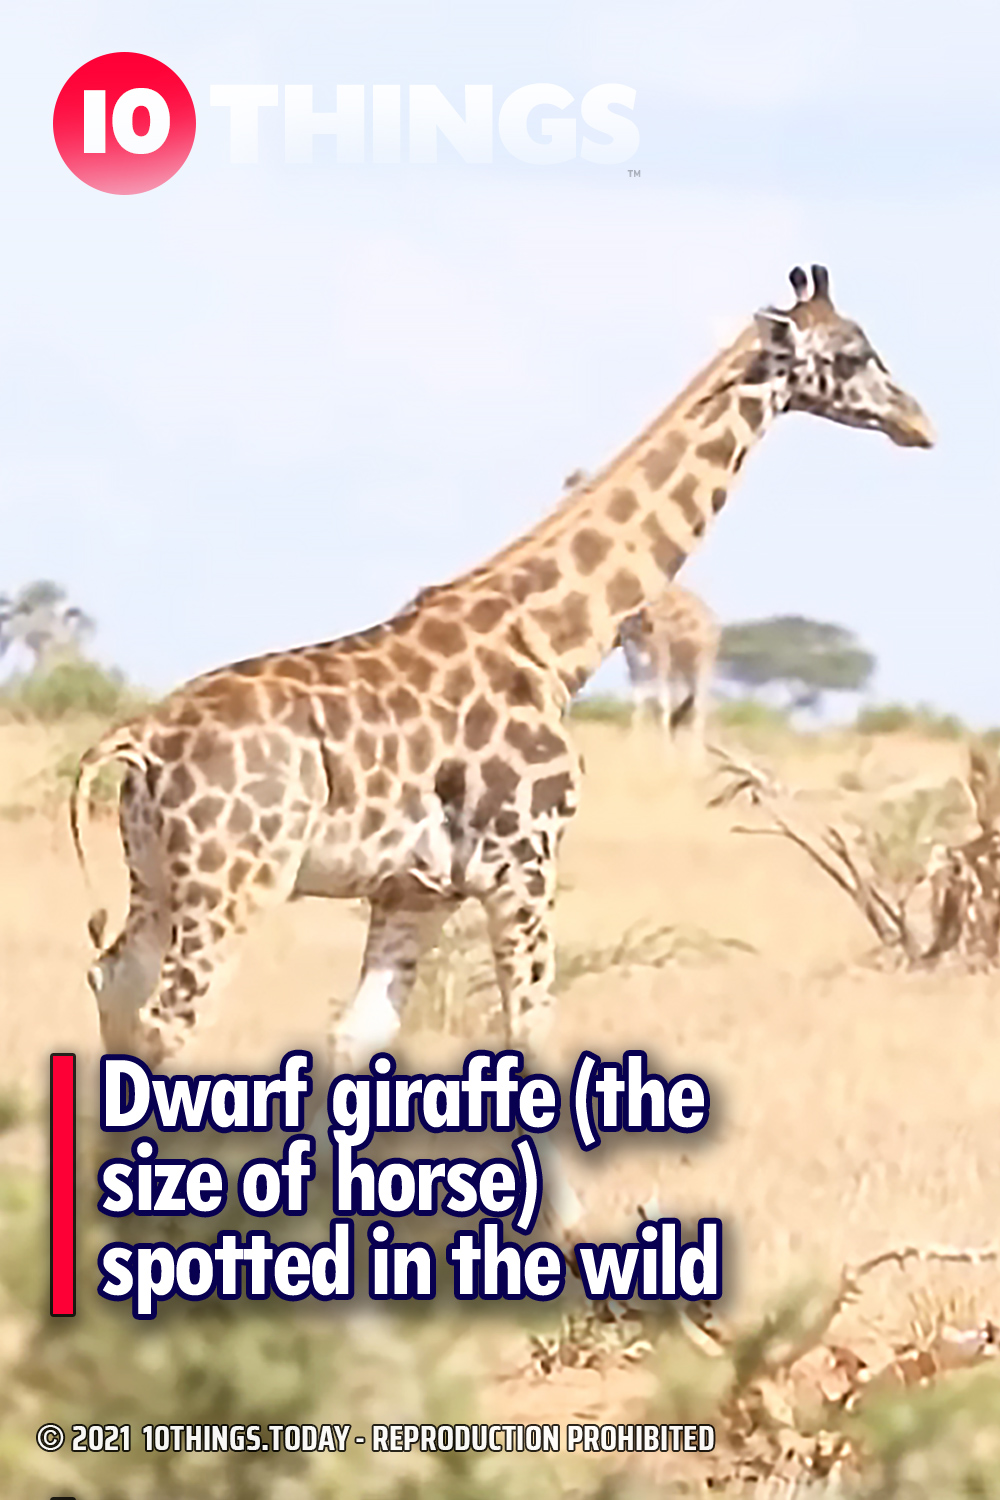 Dwarf giraffe (the size of horse) spotted in the wild